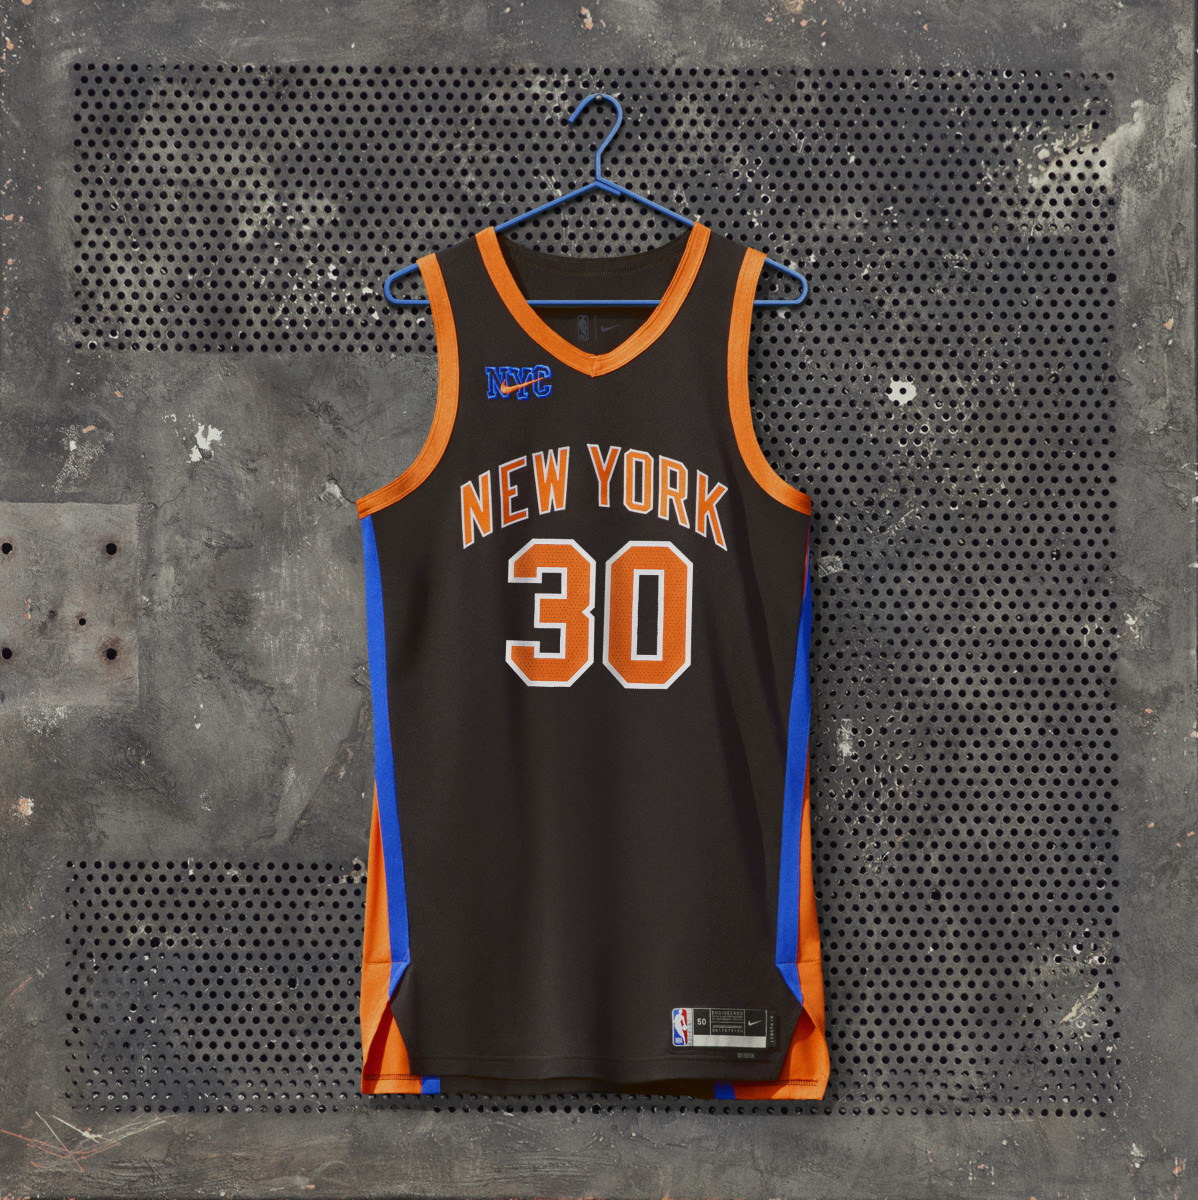 Every NBA City edition jersey for 2022-2023, ranked 